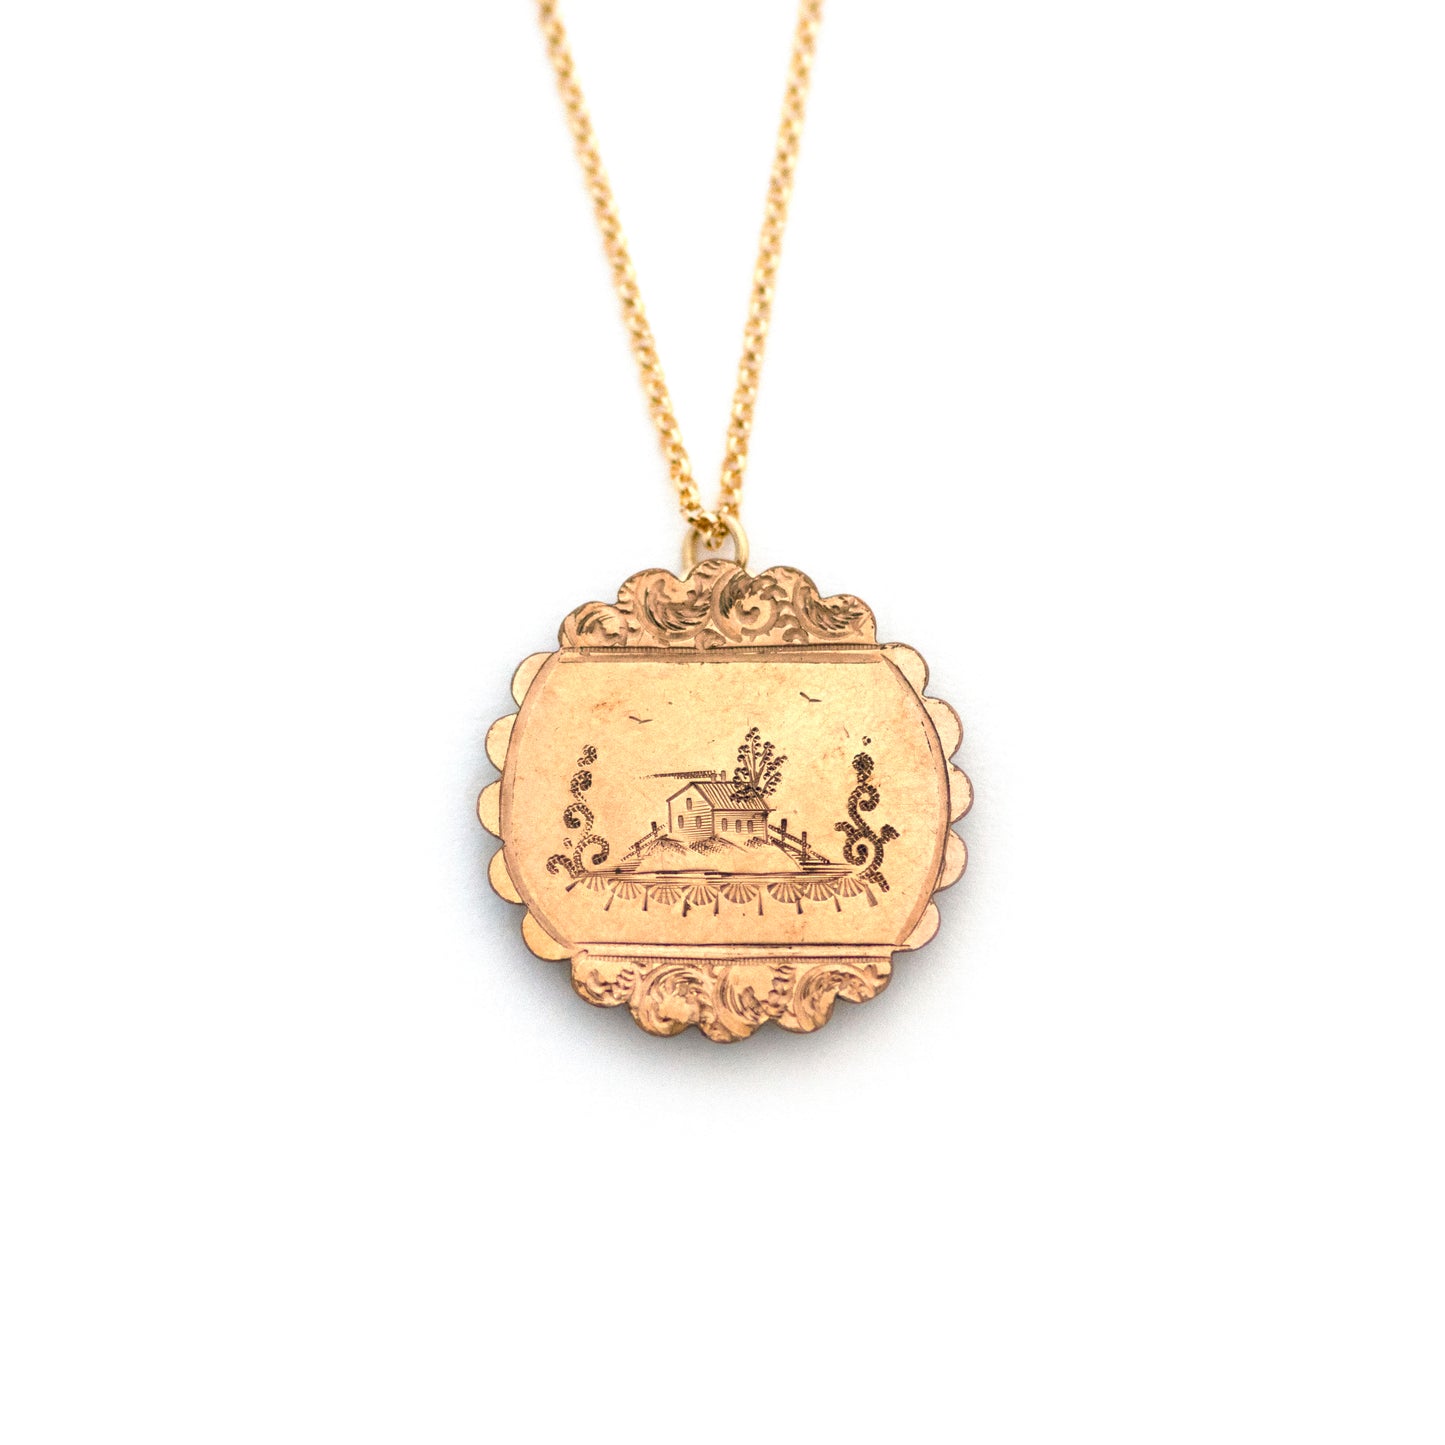 Little House on the Prairie Antique Victorian Necklace